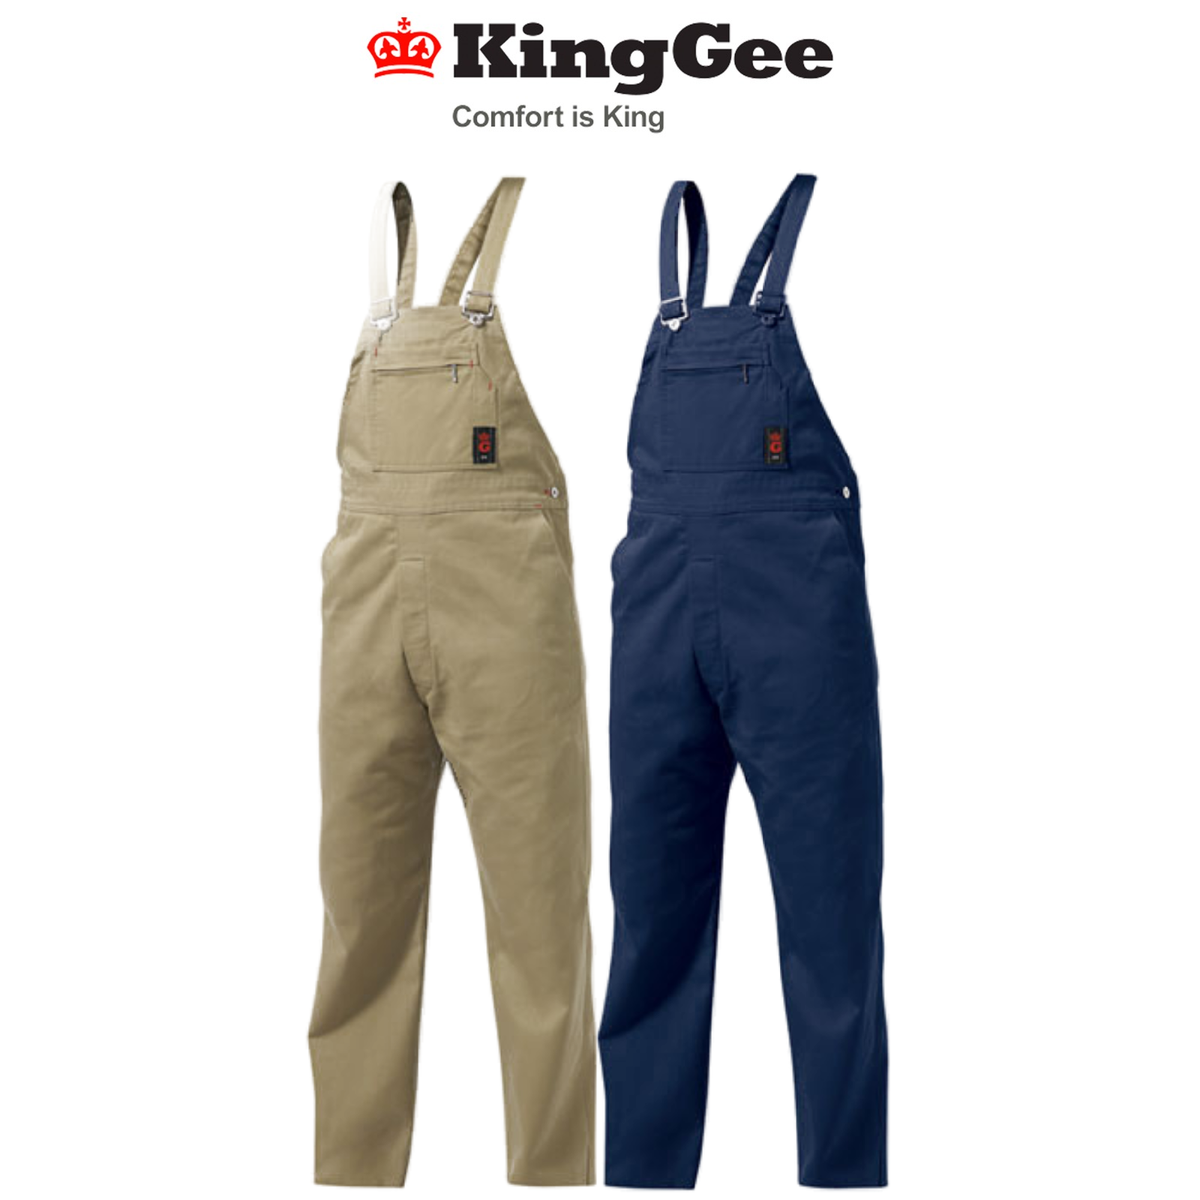 KingGee Bib and Brace Drill Overall Classic Adjustable Strap Work K02010